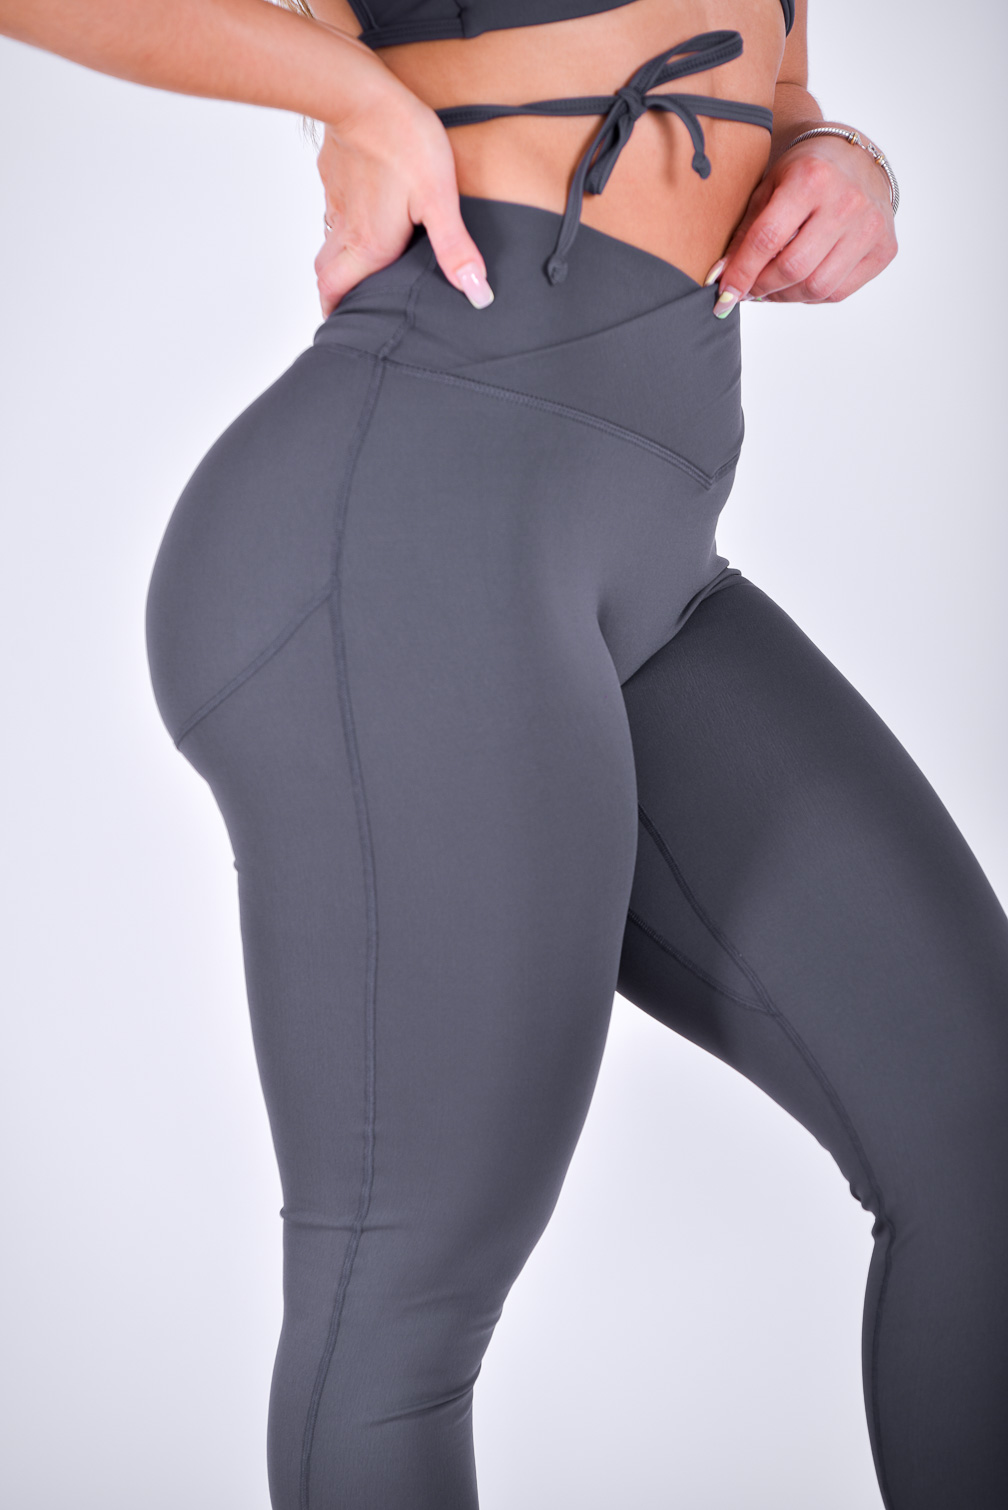 Urban Seamless Leggings - Dark Grey #dark #grey #leggings #outfit #casual  Outfit Goals featuring Lov… | Grey leggings outfit, Outfits with leggings,  Gymwear outfits